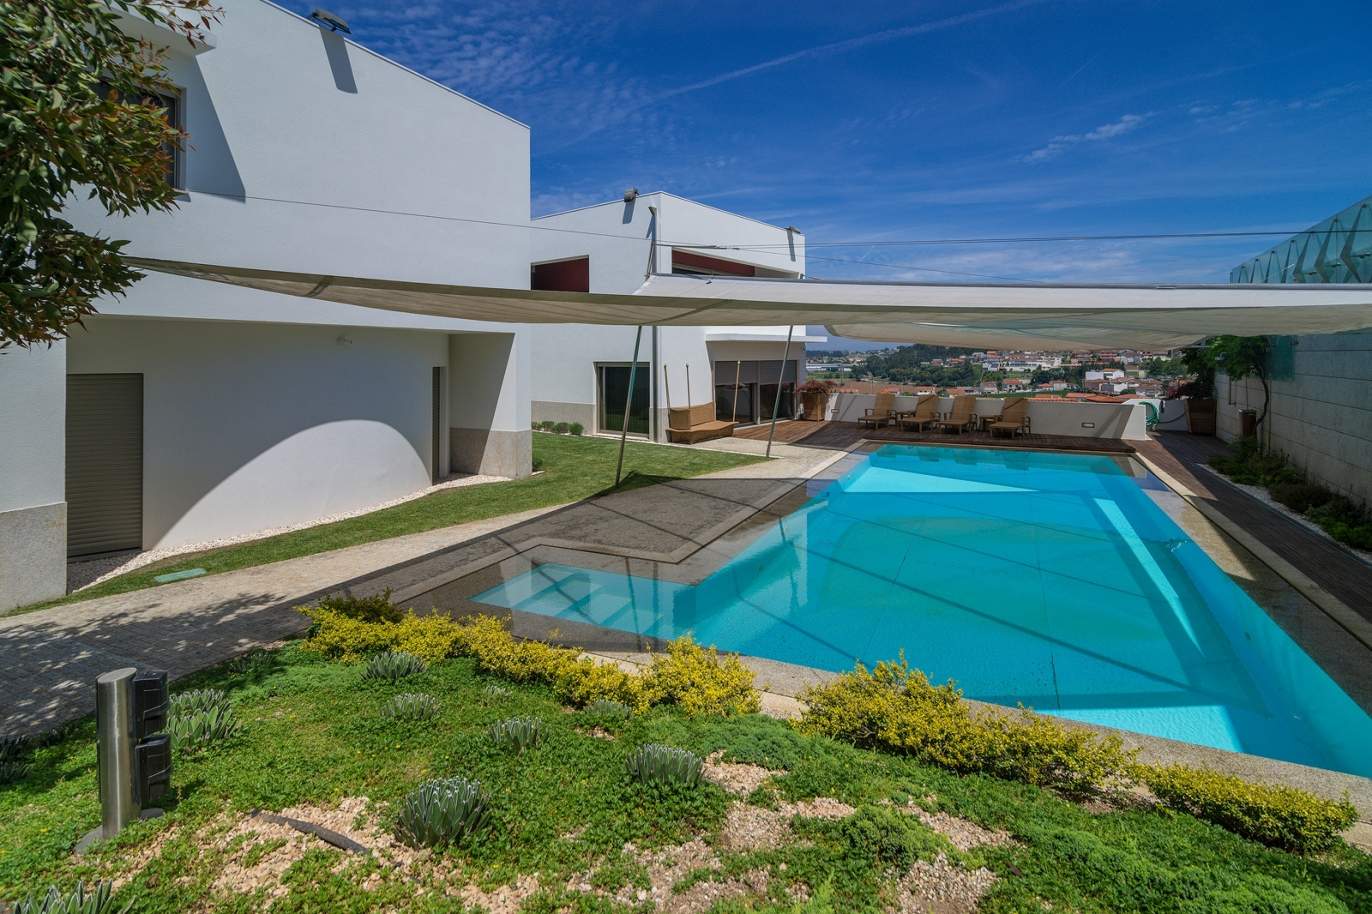 3 Bedroom Villa, with pool and garden, for sale, at Trofa, Porto, Portugal_154947